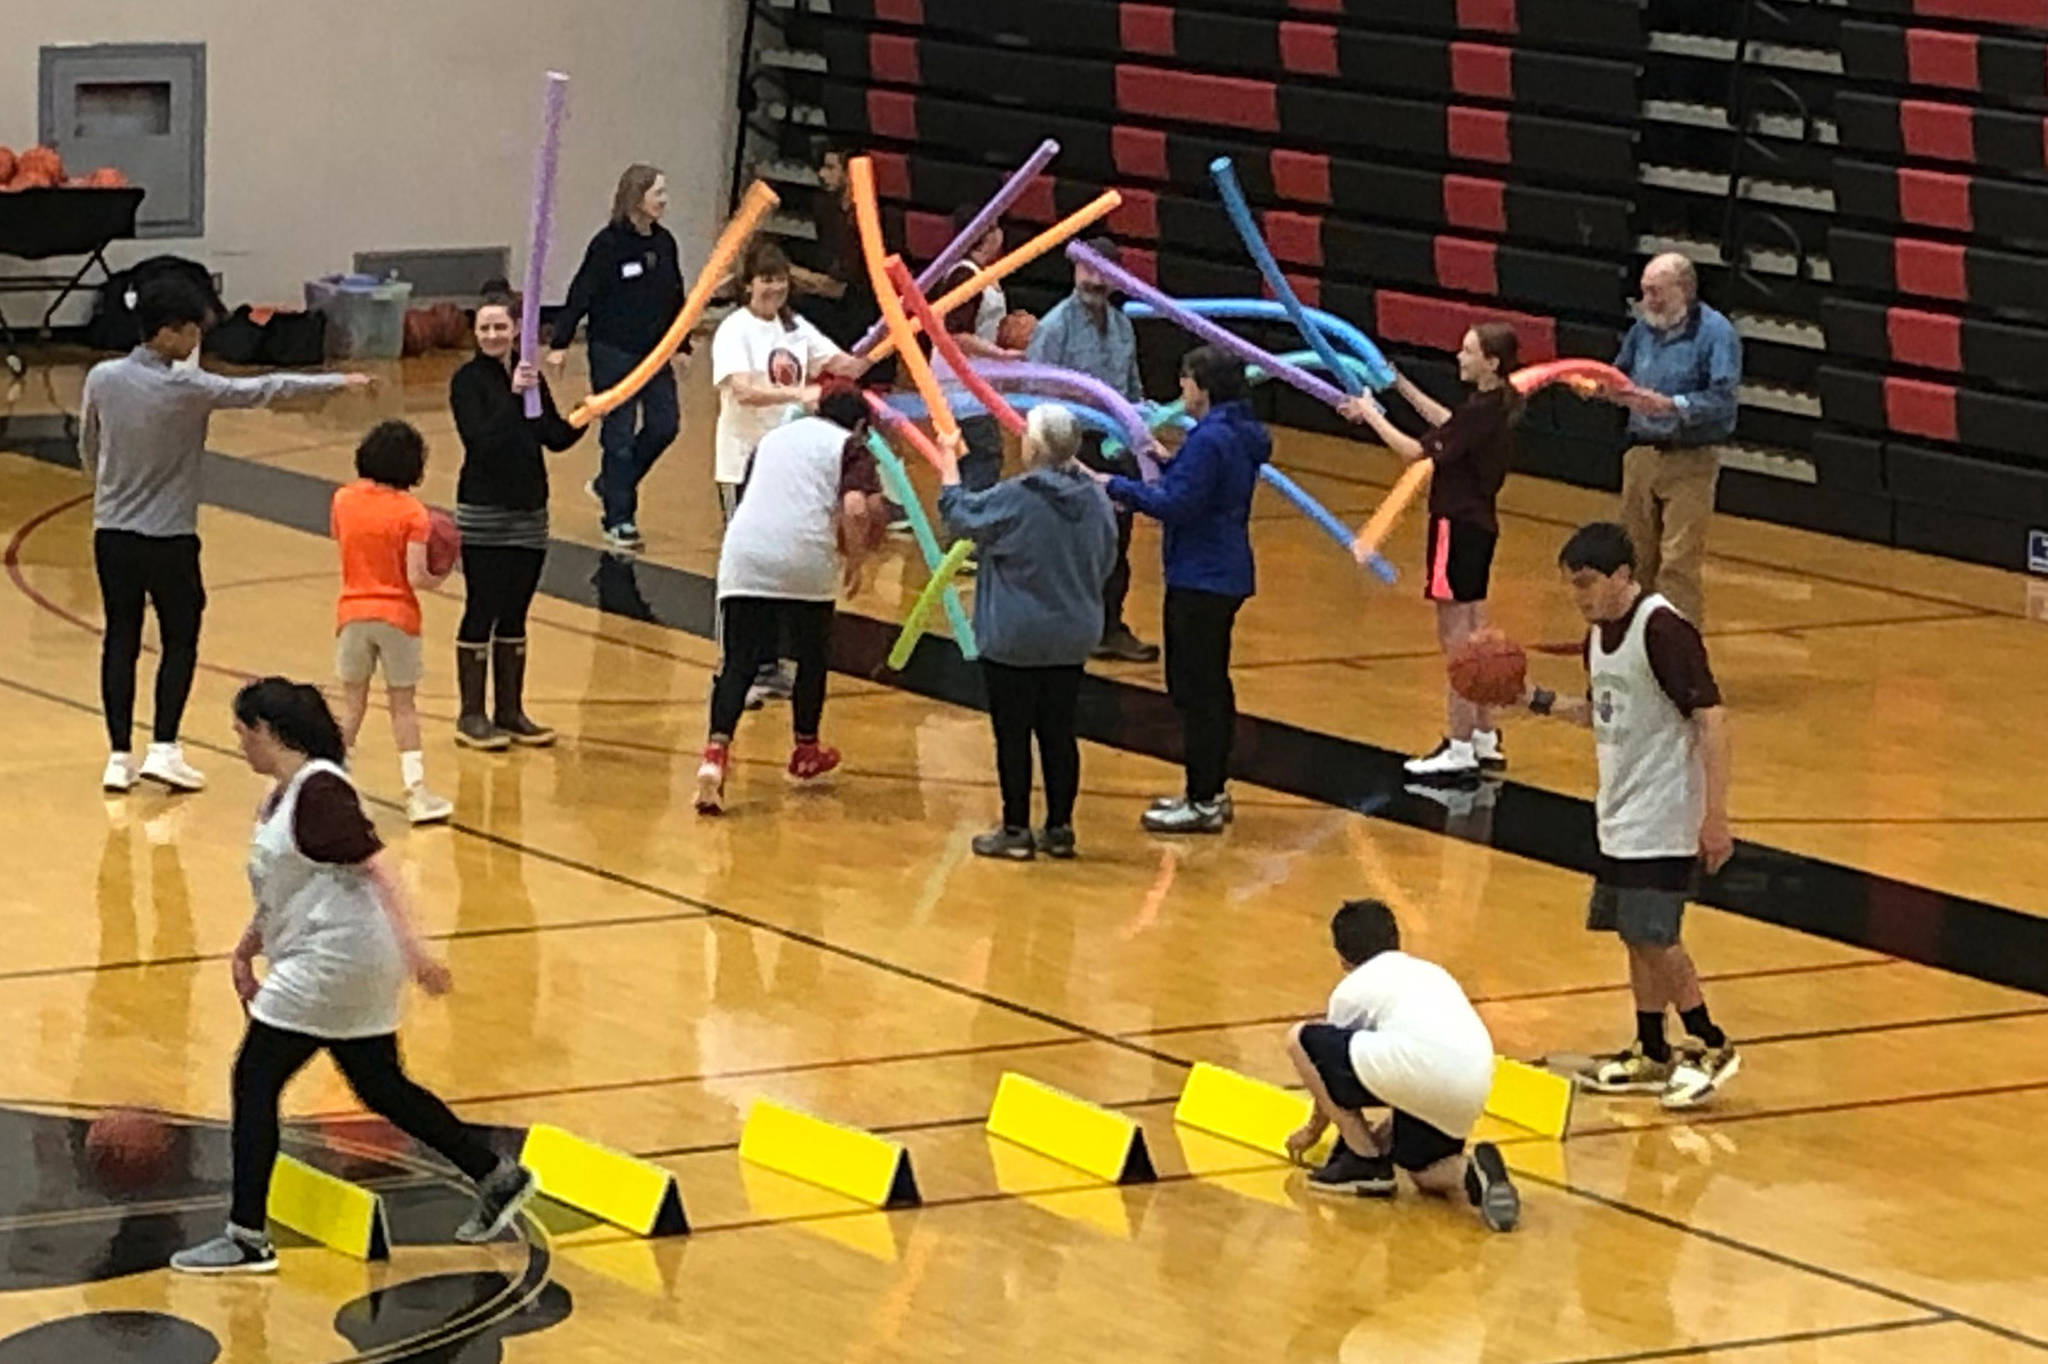 Coaches wave foam noodles as campers try to dribble through them without losing the ball at the I Did, You Can! basketball camp on Sunday, Sept. 29, 2019. (Courtesy Photo | Janette Gagnon)